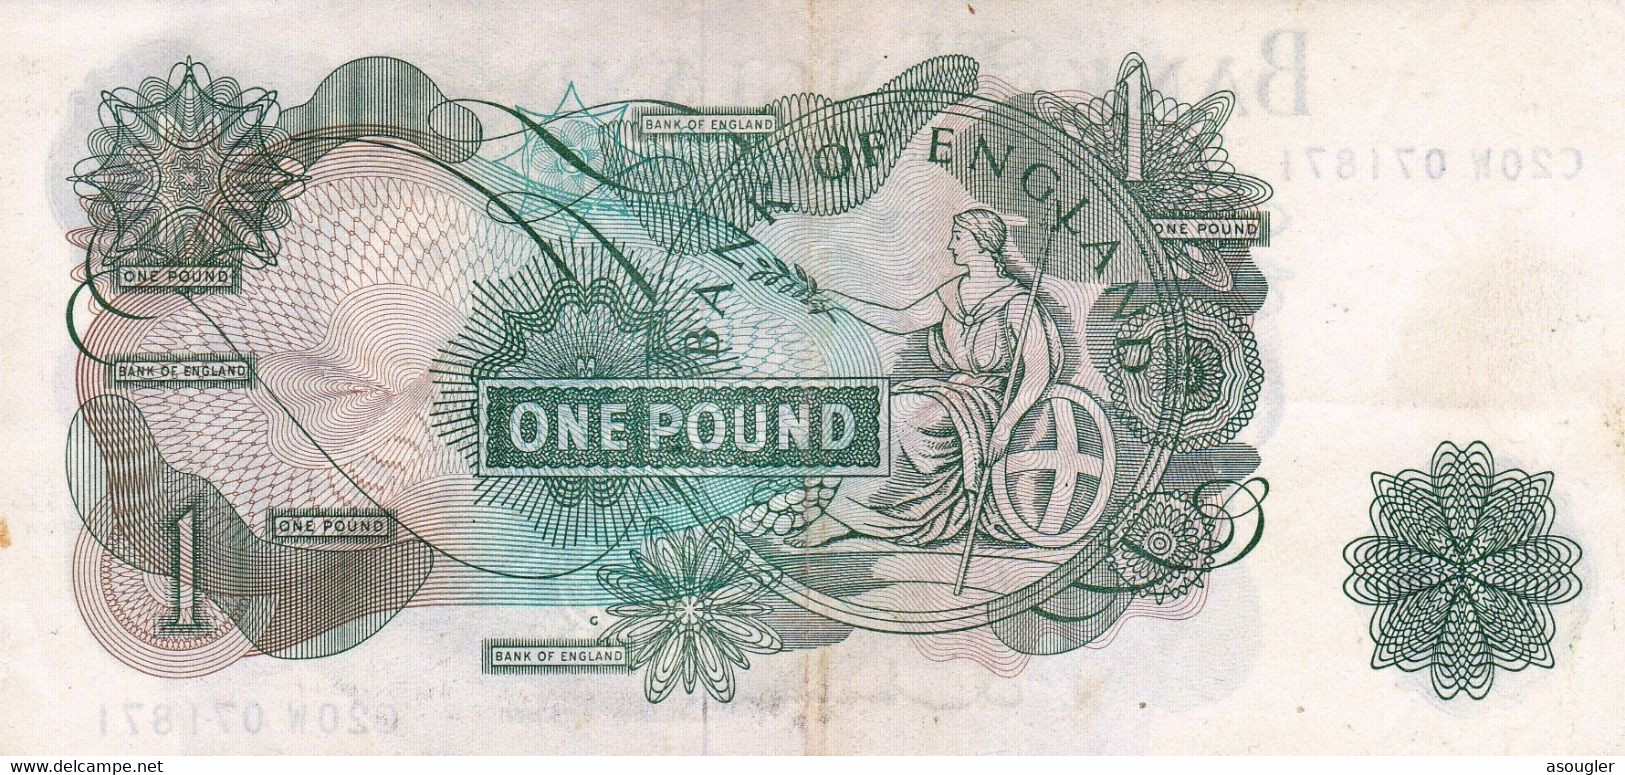 Great Britain United Kingdom England 1 POUND 1962-66 EXF P-374d "free Shipping Via Registered Air Mail" - 1 Pound